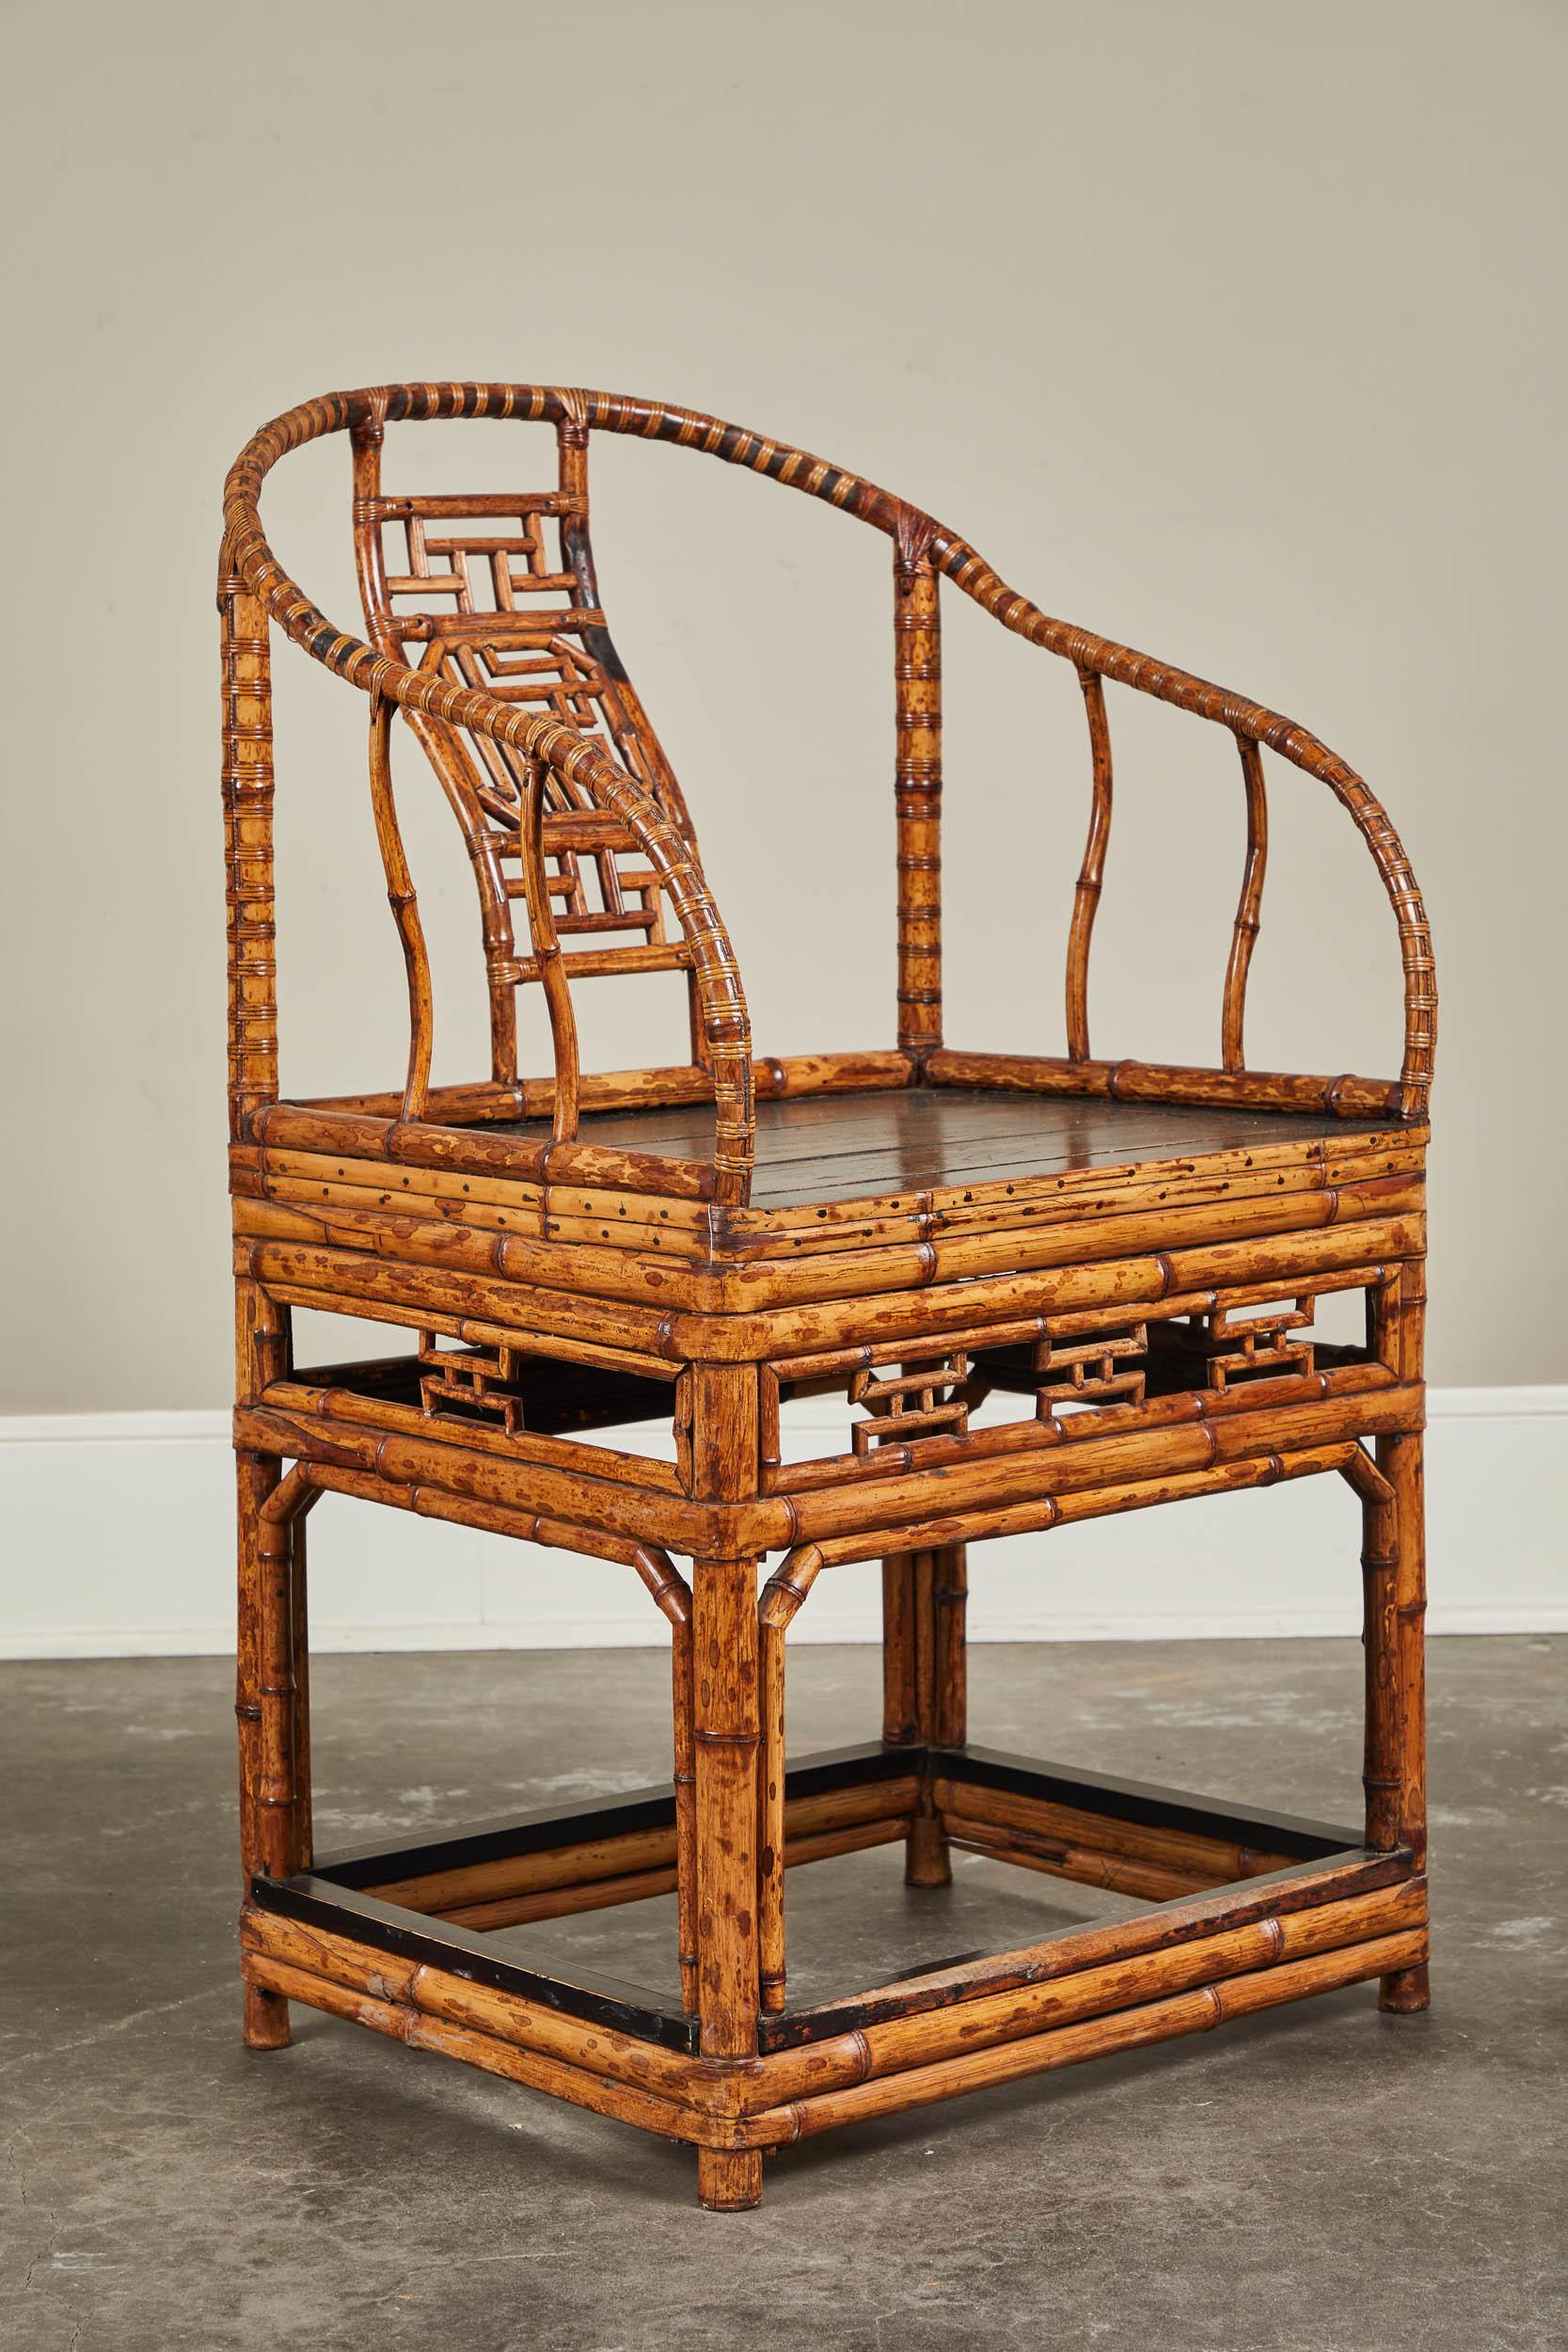 A 19th century Chinese horseshoe back armchair. Made from sturdy bamboo with a black lacquered seat and back splat details.